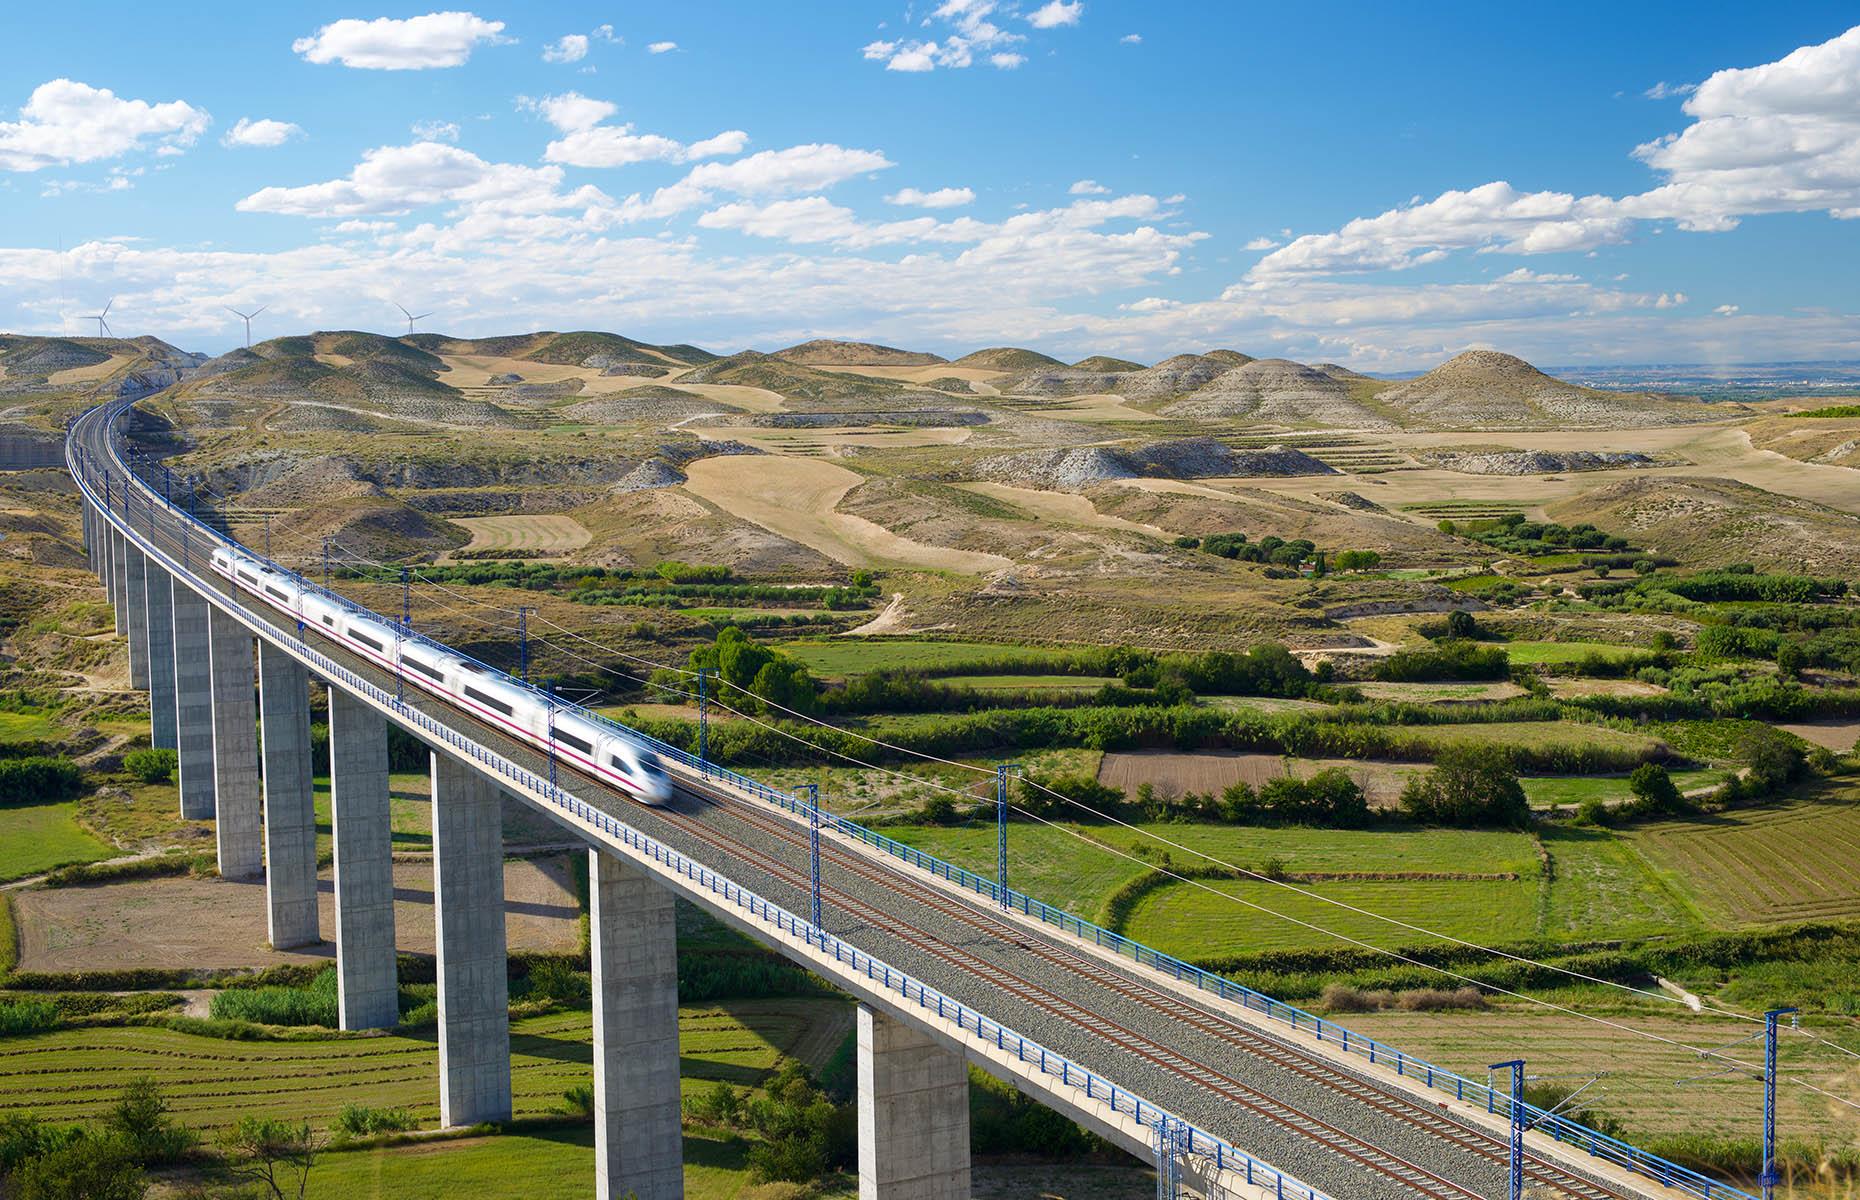 <p>In 2023, Spain announced funding for research into a high-speed rail link to Morocco – 14 years after the idea was originally raised. The line will be the first to connect Europe and Africa, bridging nine miles (14km) between the two continents. Current plans suggest it would run beneath the strait of Gibraltar, much like the Channel Tunnel links England and France. The line would likely link Tarifa or Algeciras in Spain to Tangier station in Morocco. These days, high speed trains such as this one (pictured) crossing a viaduct in Spain reach speeds of between 124 and 221 miles per hour (200-355km/h) – a far cry from the early days of train travel.</p>  <p><strong>Liked this? Click on the Follow button above for more great stories from loveEXPLORING</strong></p>  <p><strong><a href="https://www.loveexploring.com/galleries/86683/the-worlds-most-scenic-train-journeys-that-dont-cost-a-fortune?page=1">Now discover the world's most scenic train journeys that don't cost a fortune</a></strong></p>